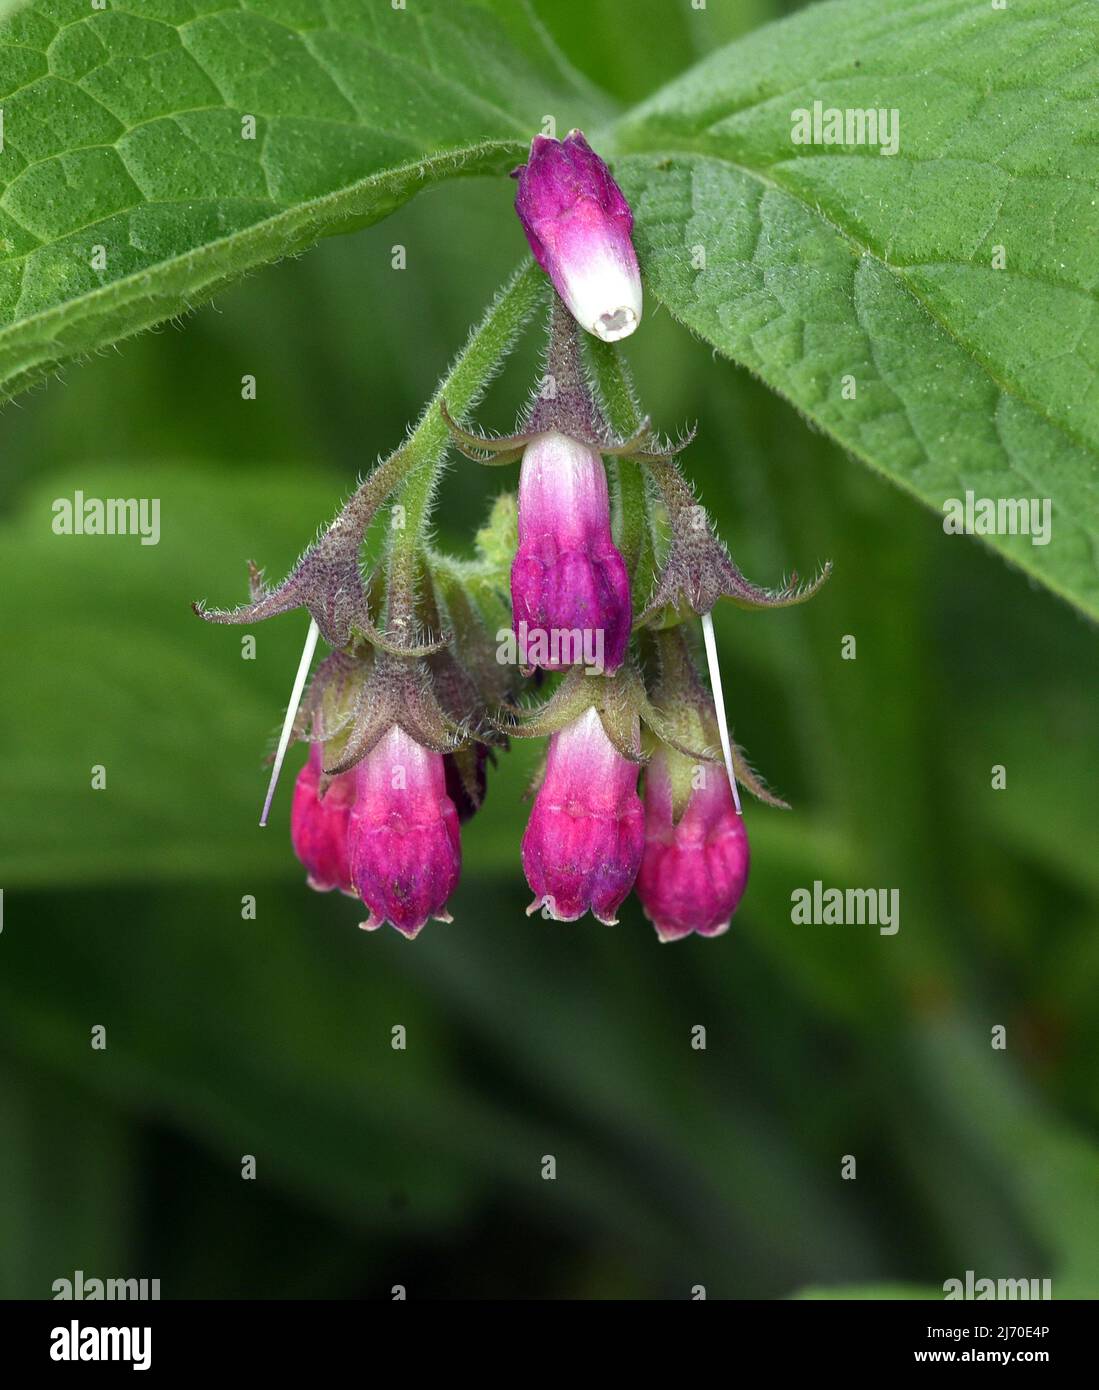 Comfrey, Symphytum, officinale, is a wild plant with white or purple flowers. It is an important medicinal plant and is also used in medicine. Stock Photo